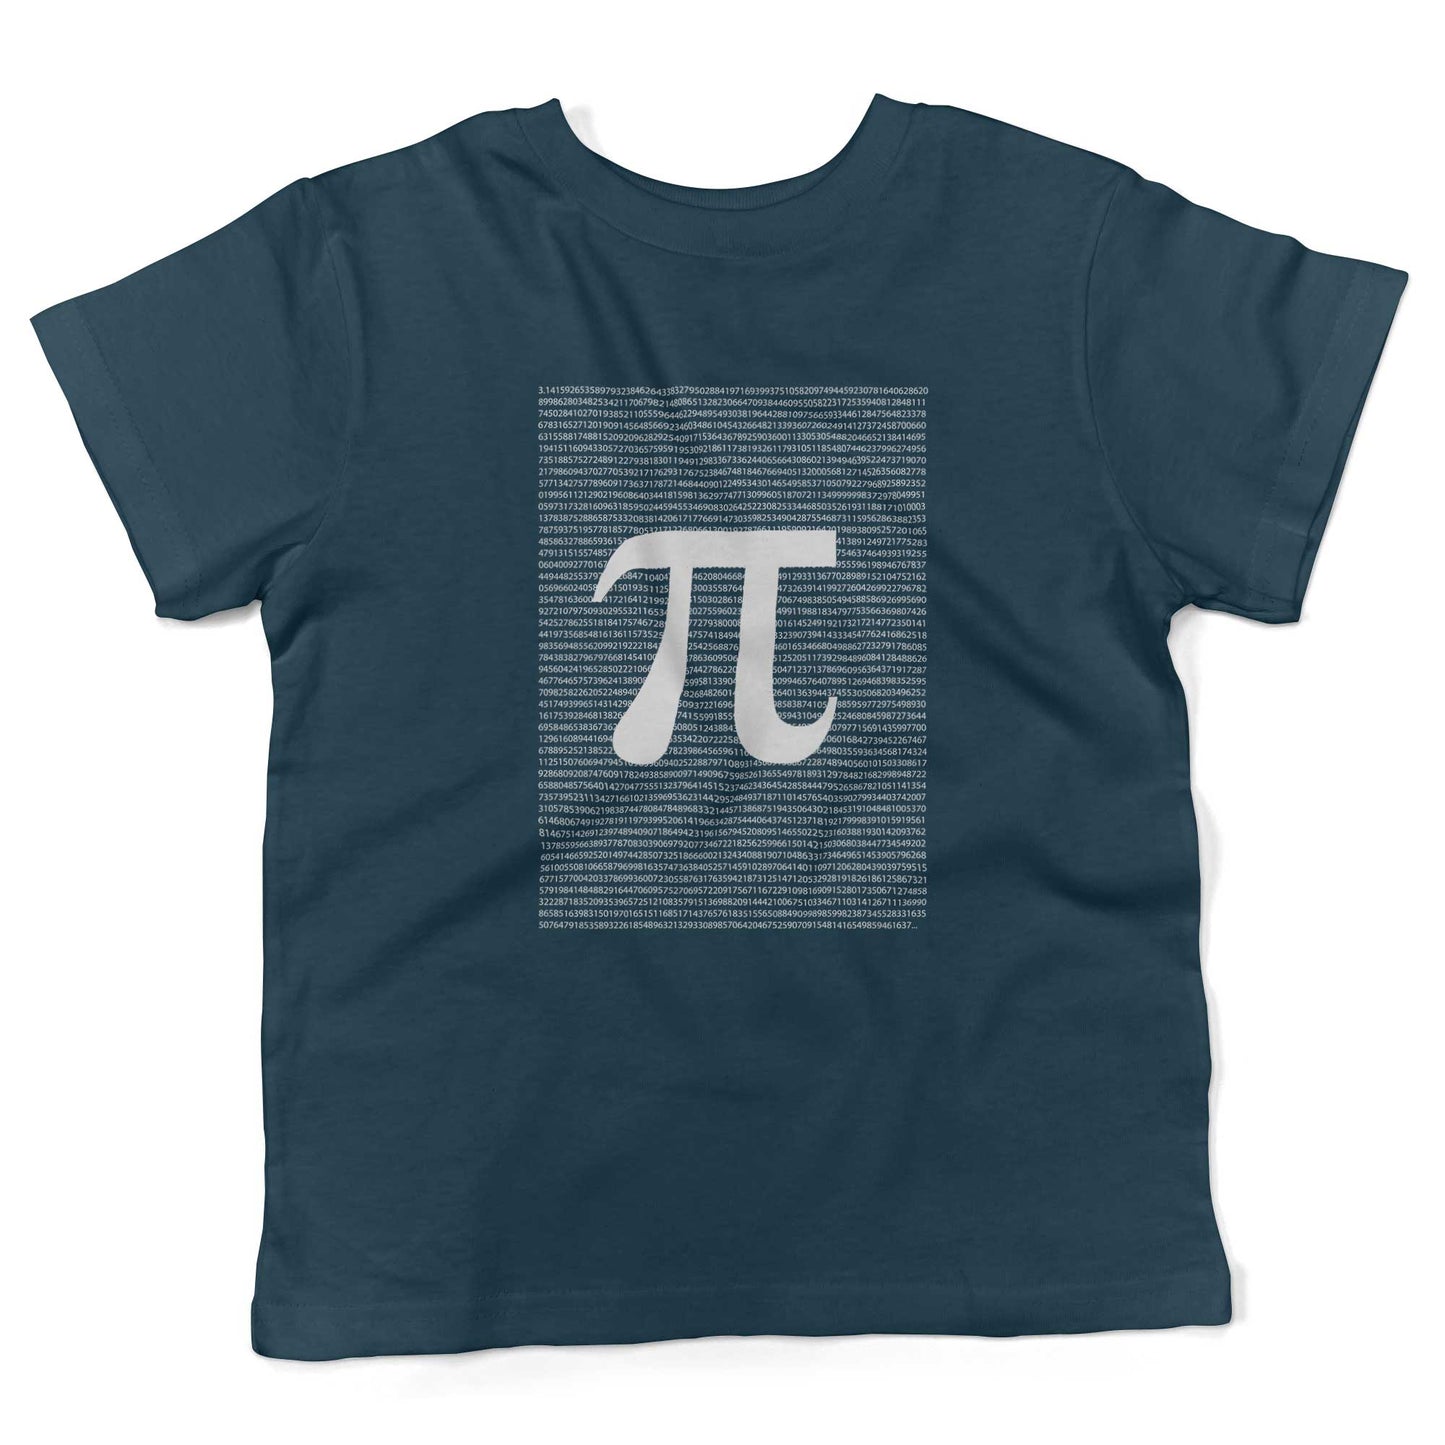 Irrational Pi Toddler Shirt-Organic Pacific Blue-2T